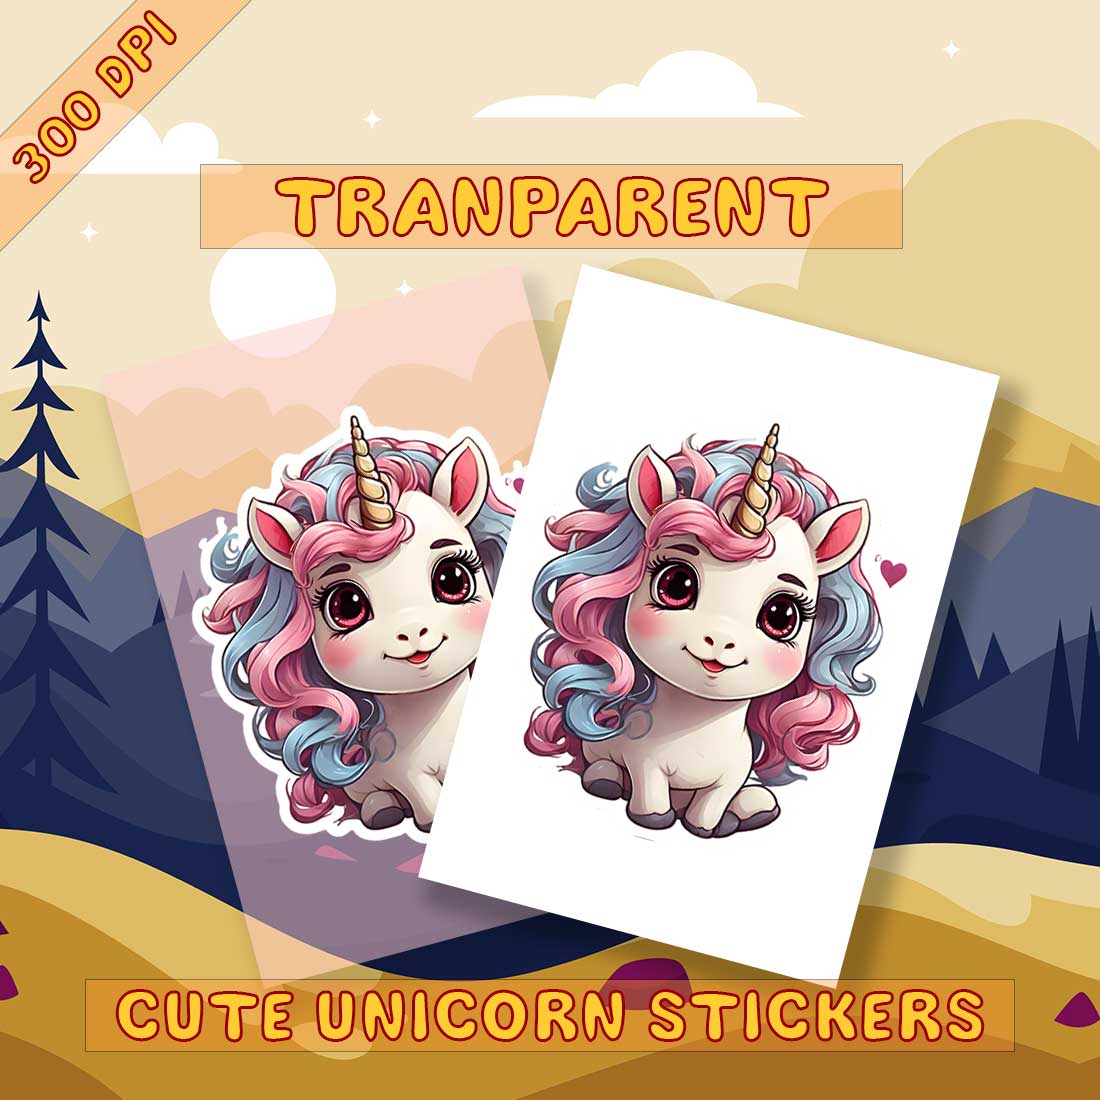 Illustrational Unicorn Sticker Pack 3 preview image.